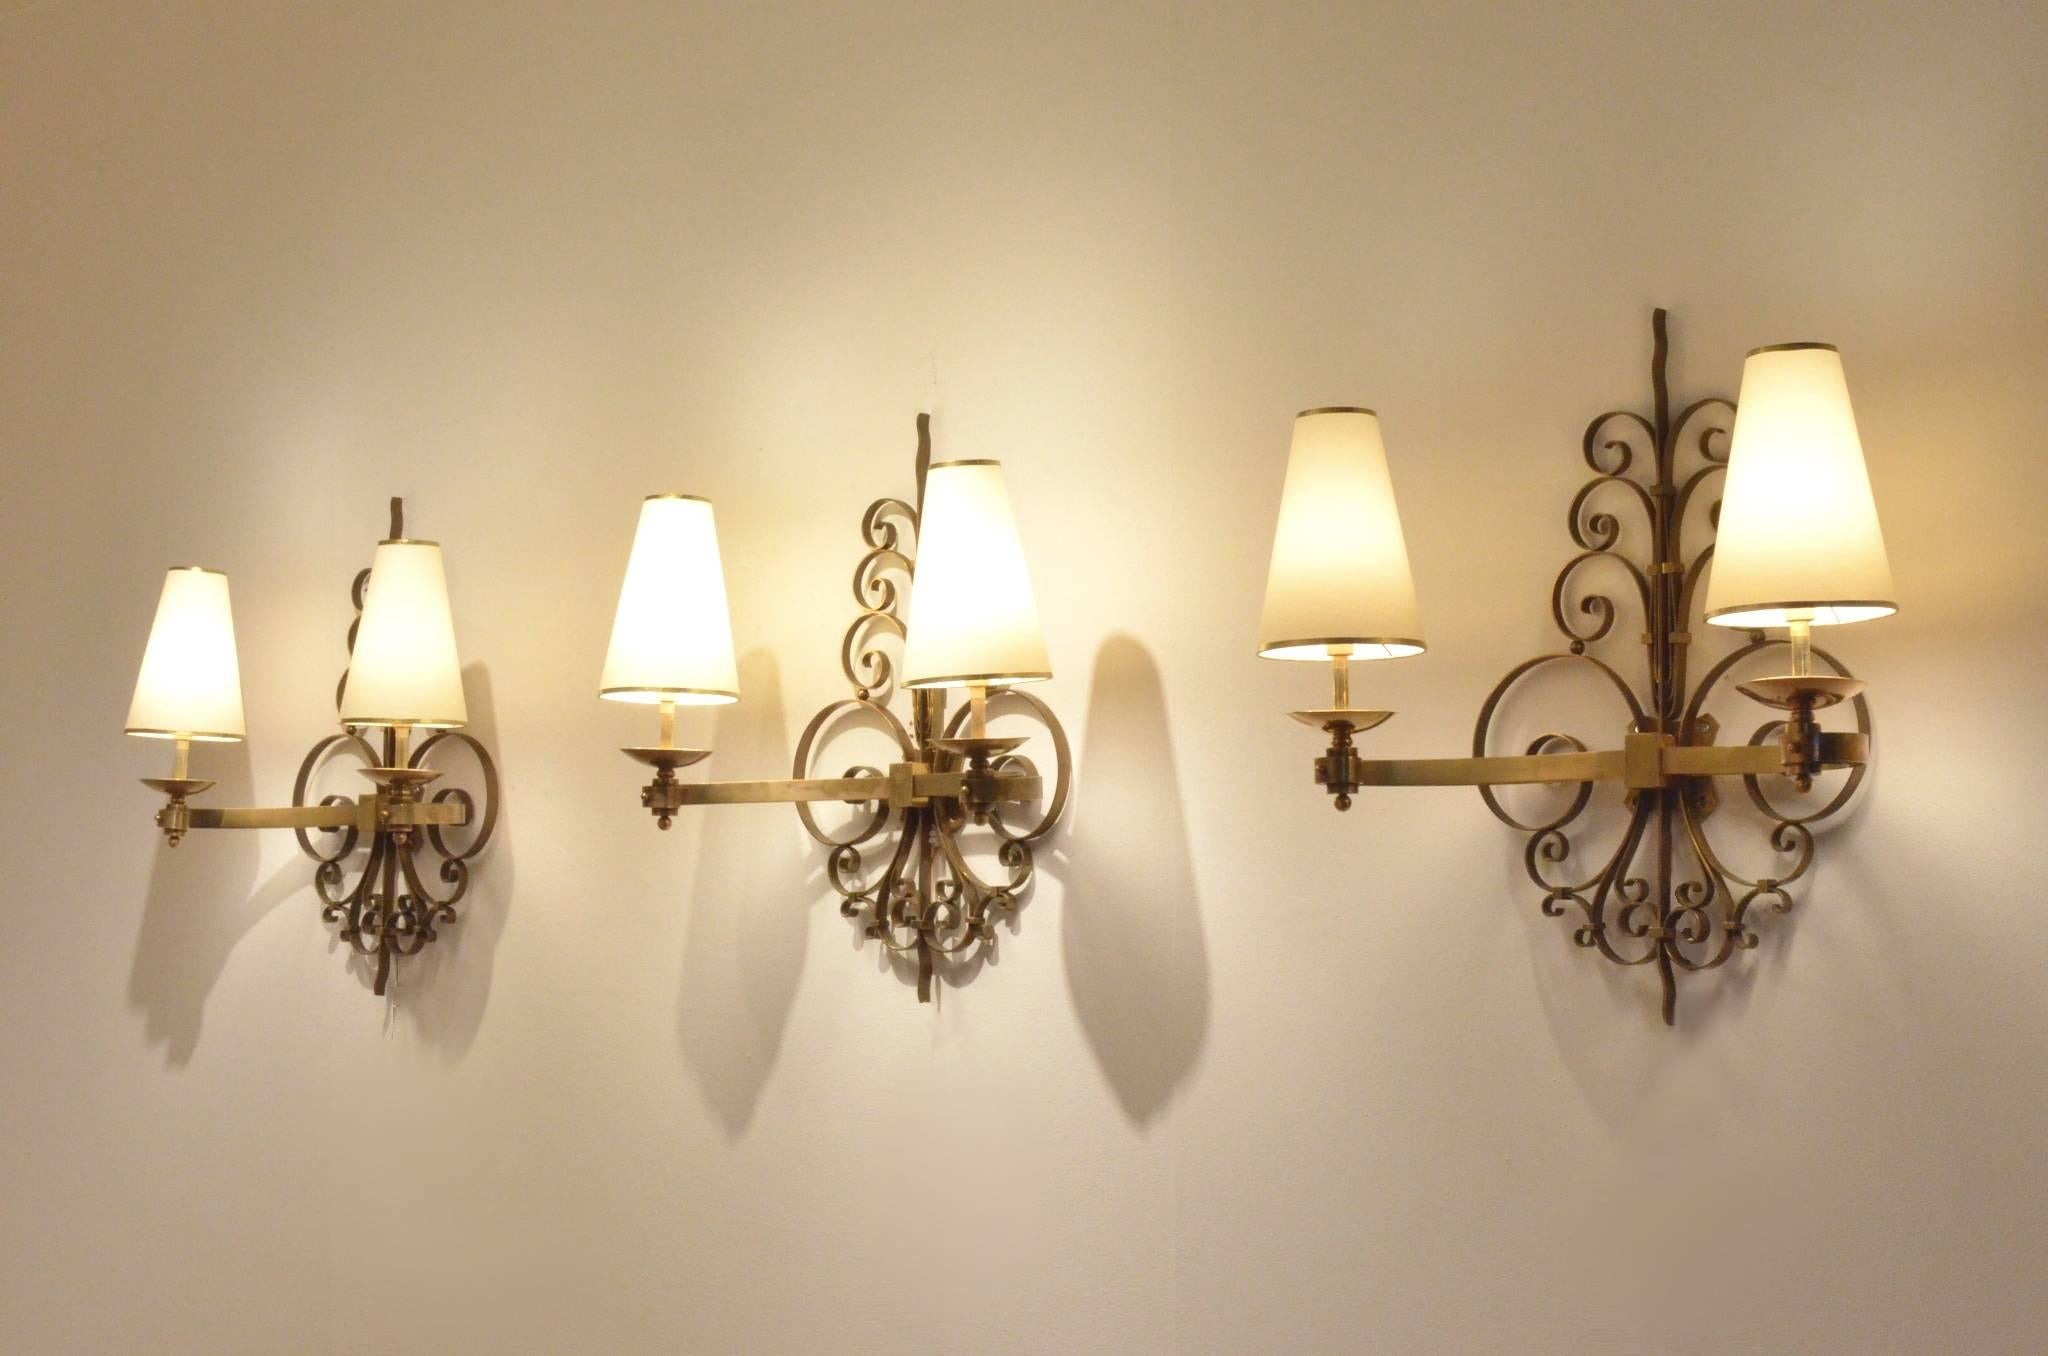 Three Art Deco René Drouet Style Sculptural Full Brass Wall Sconces Lamps, Set For Sale 4